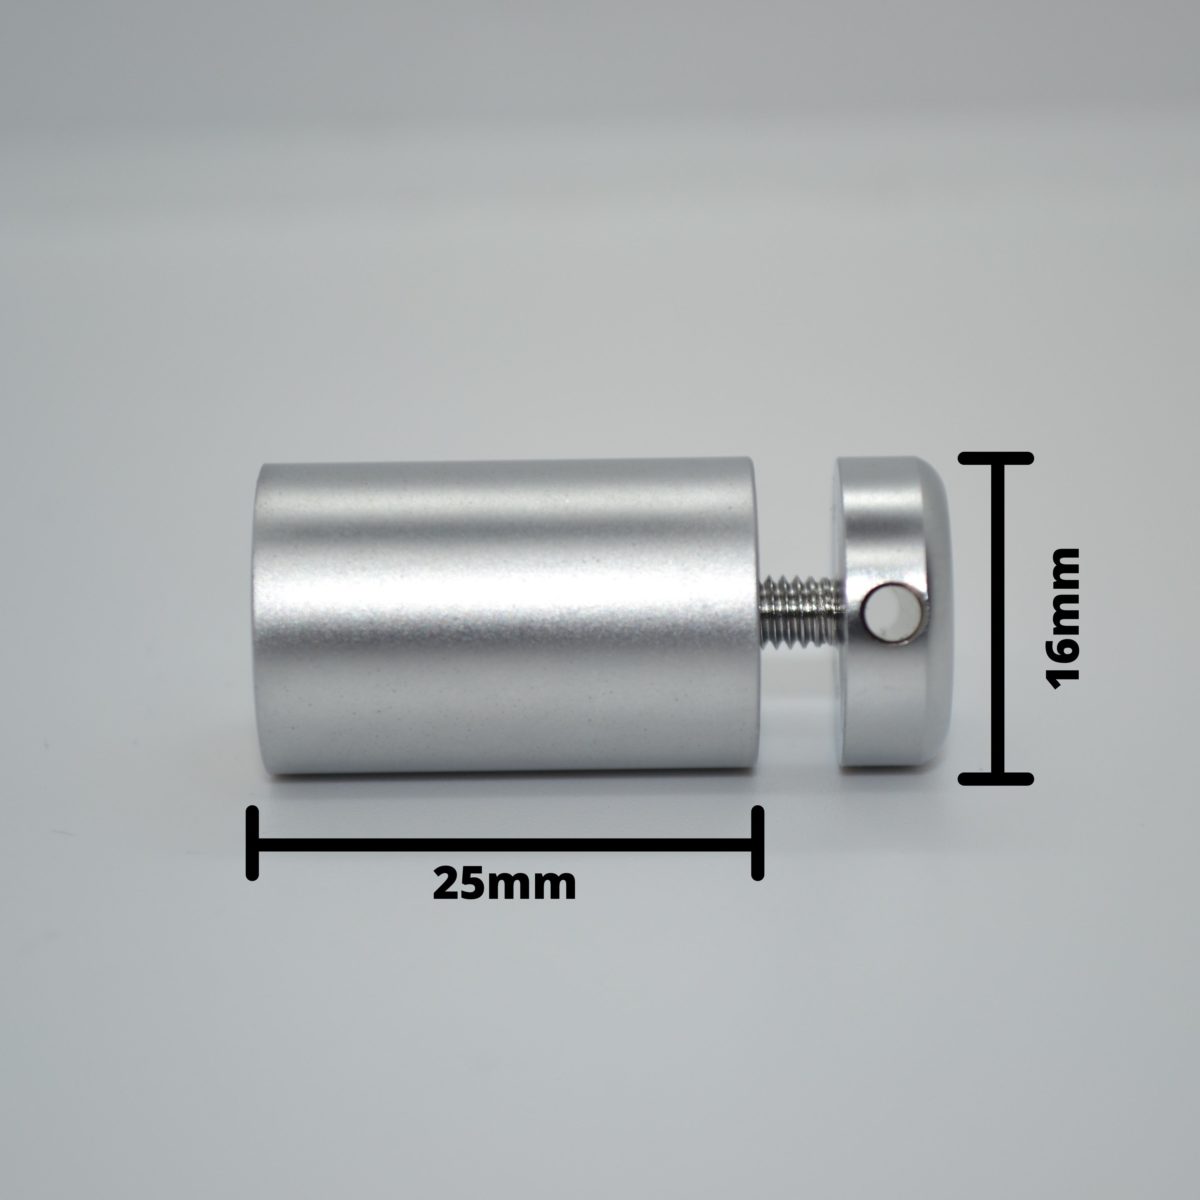 Silver tube with screw in end cap on a grey back with dimensions indicated the height and width